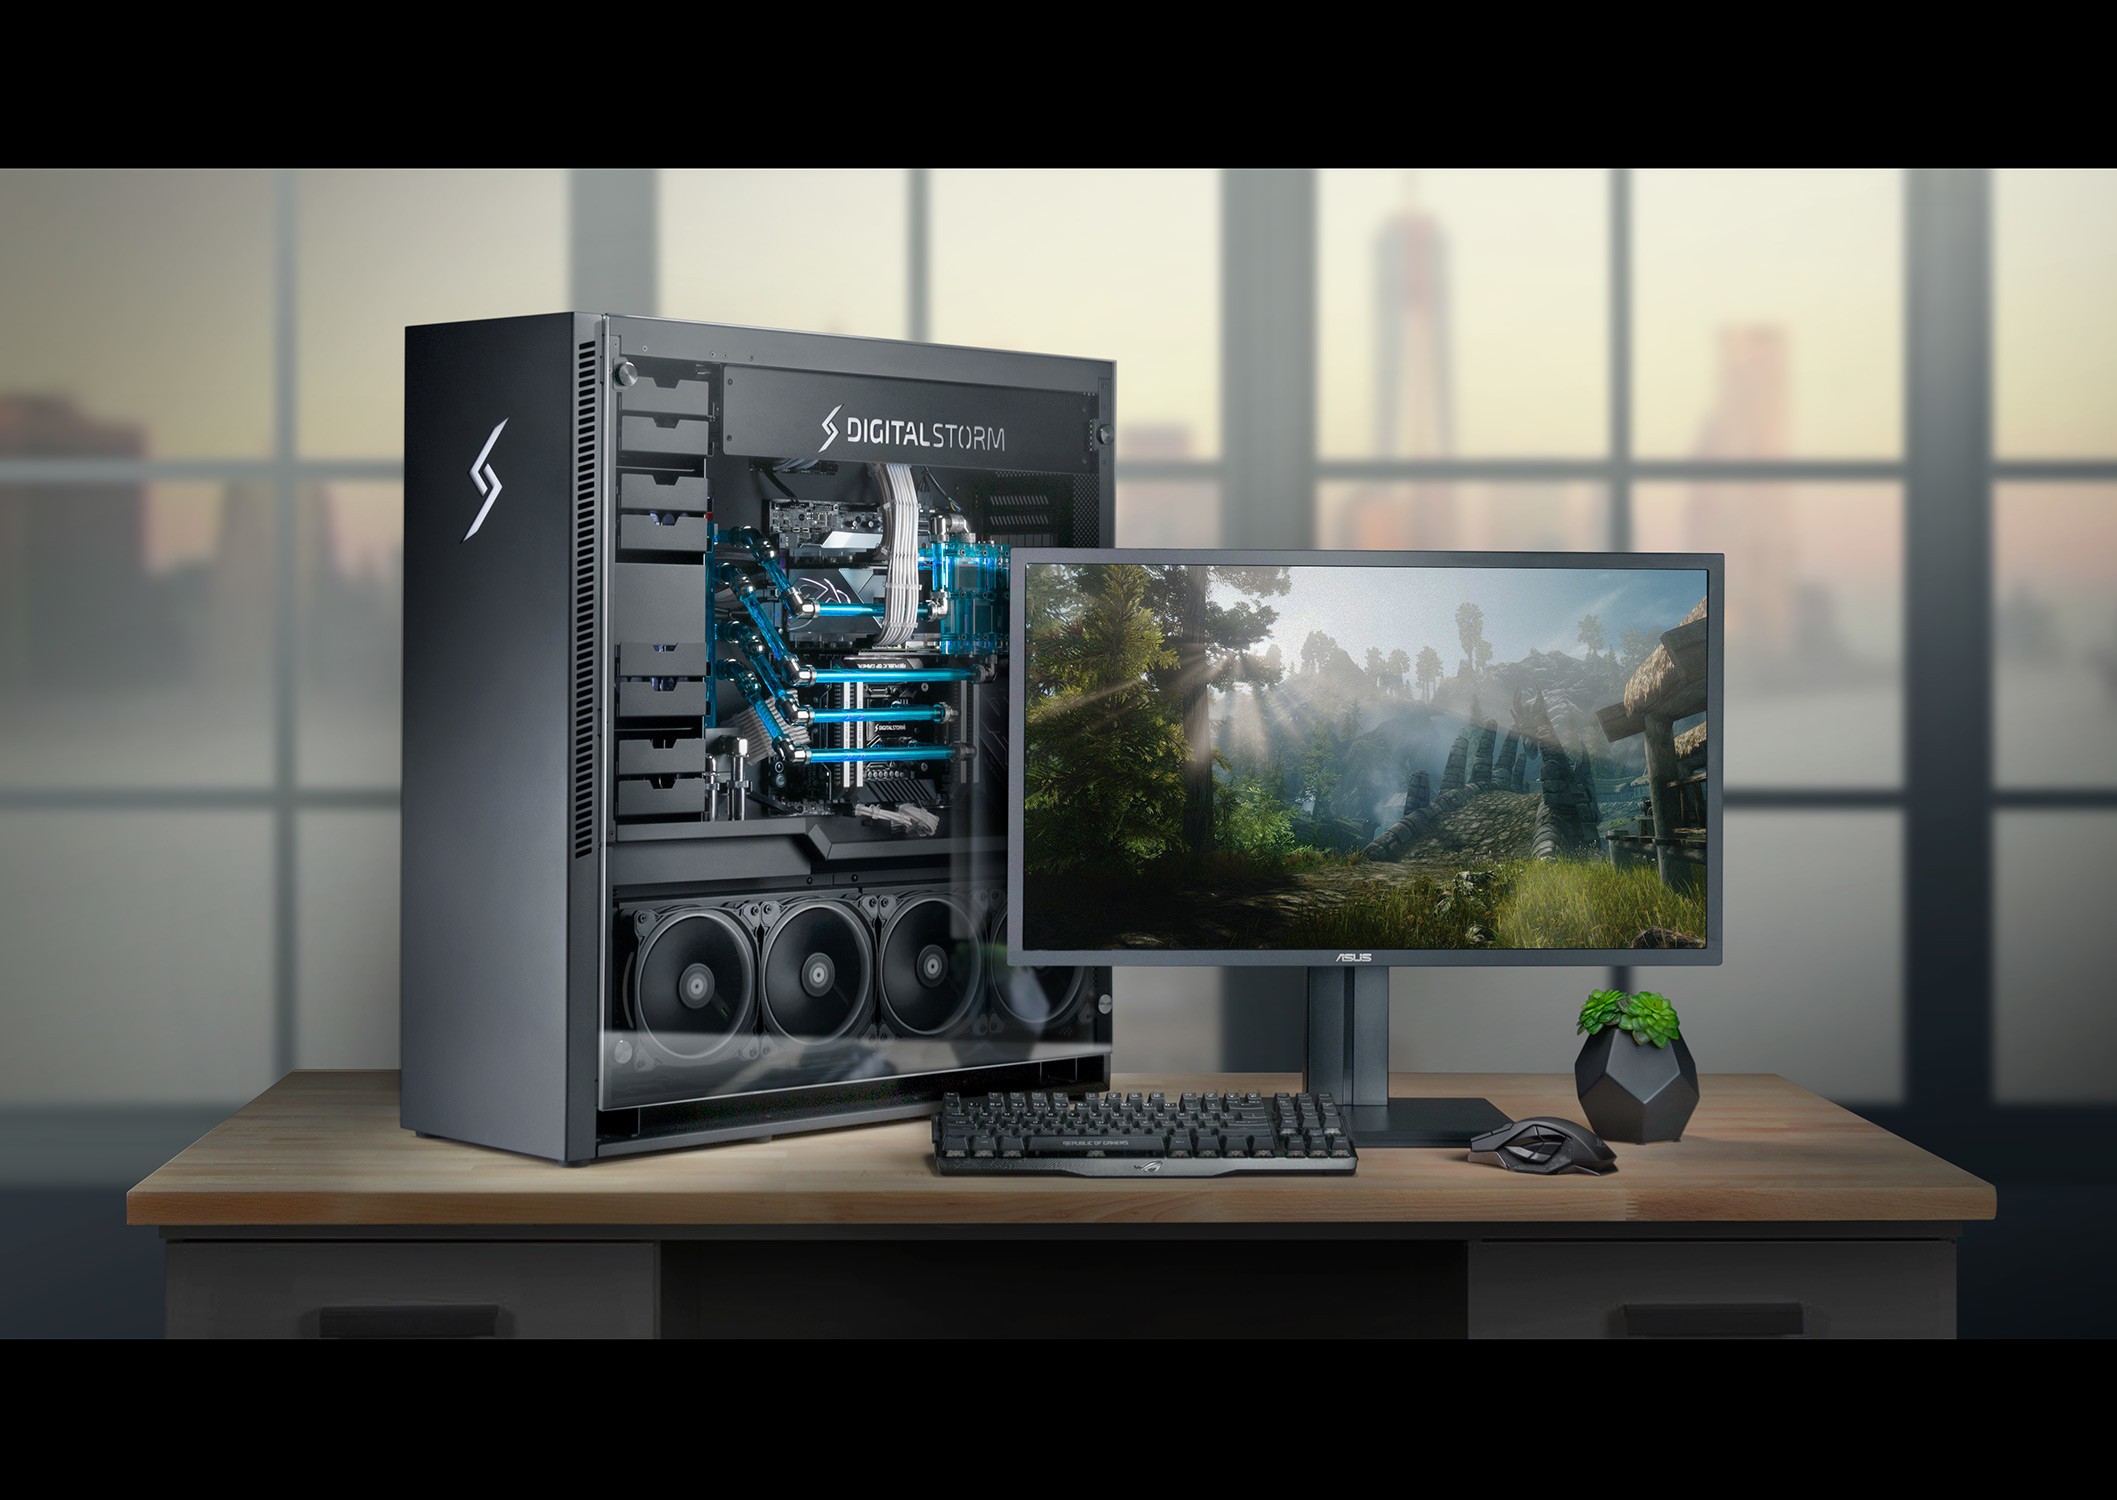 Digital Storm Finally Launches Its New Aventum X Extreme Gaming Pc